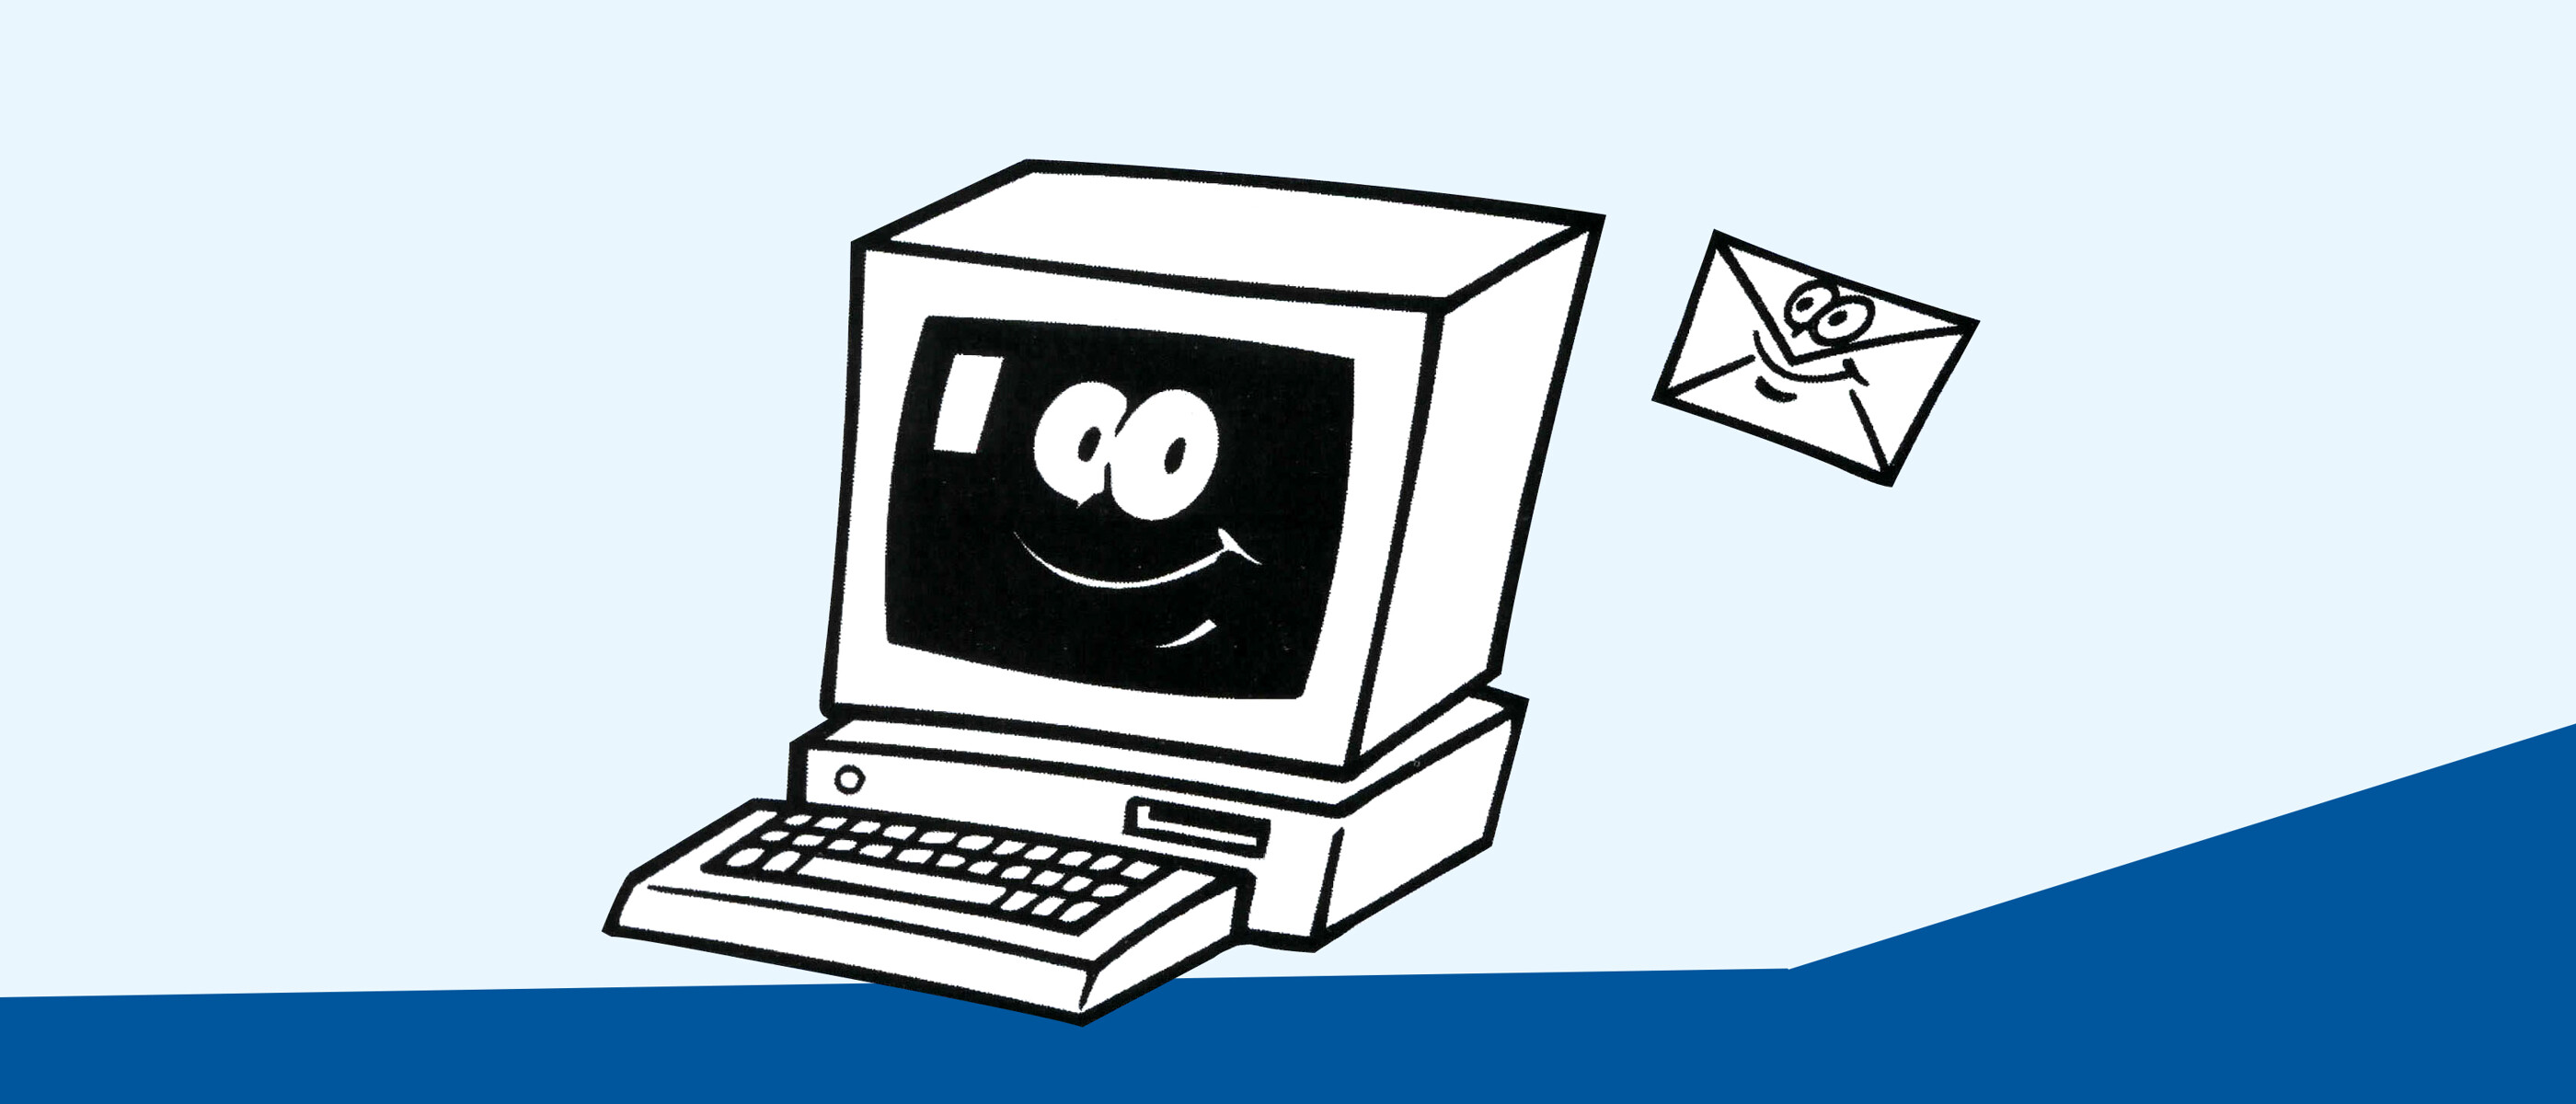 Illustration showing the use of e-mail published in the staff magazine in 1996